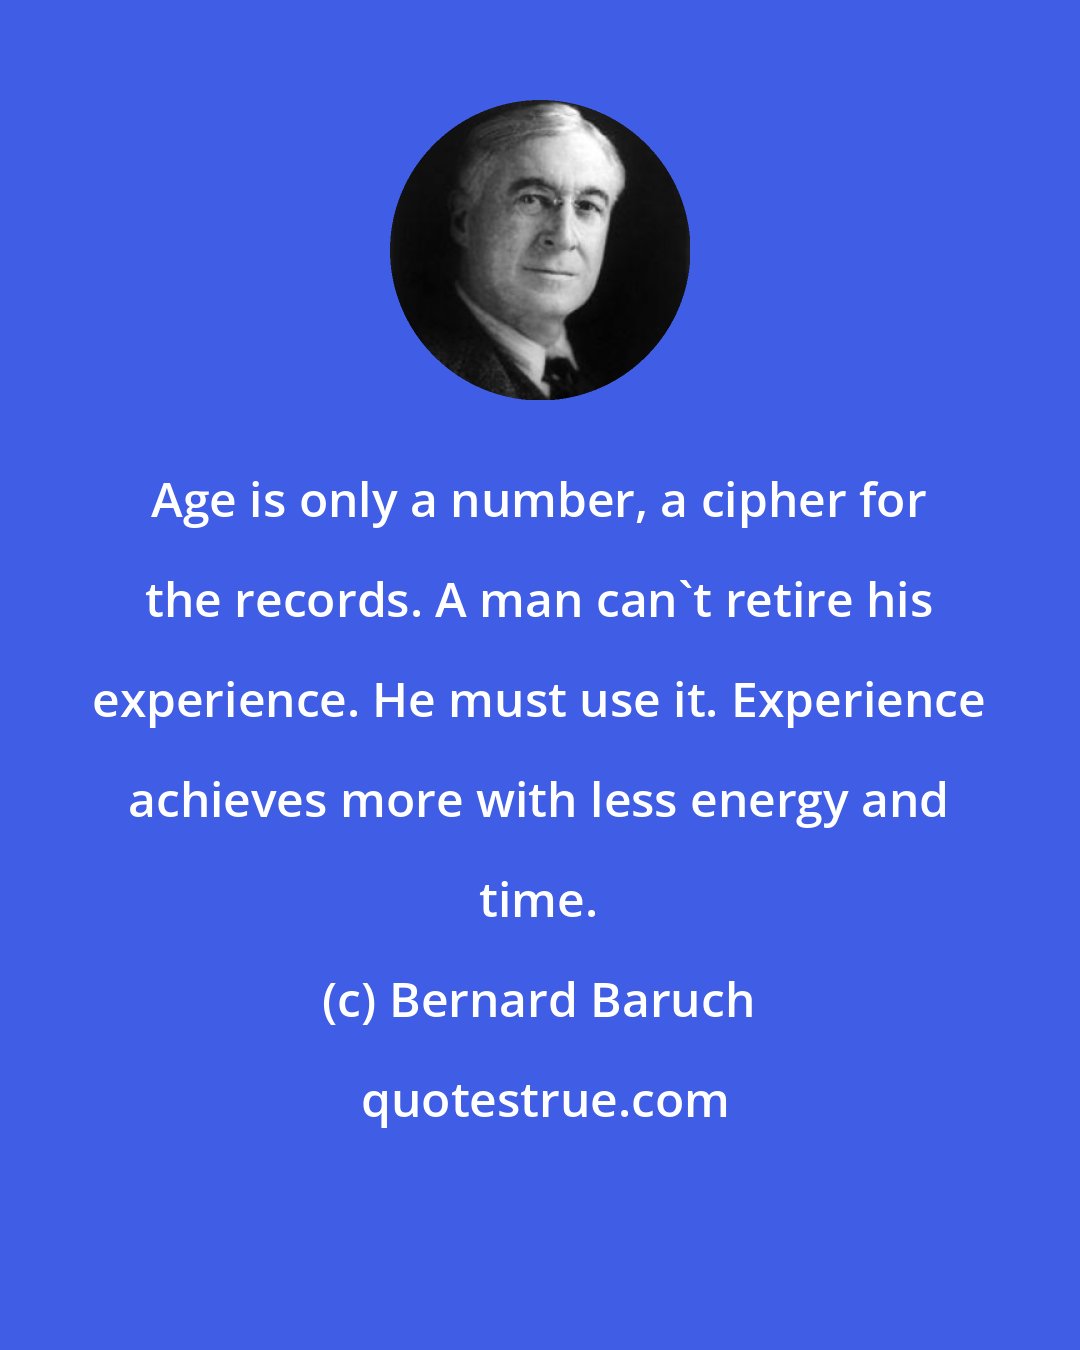 Bernard Baruch: Age is only a number, a cipher for the records. A man can't retire his experience. He must use it. Experience achieves more with less energy and time.